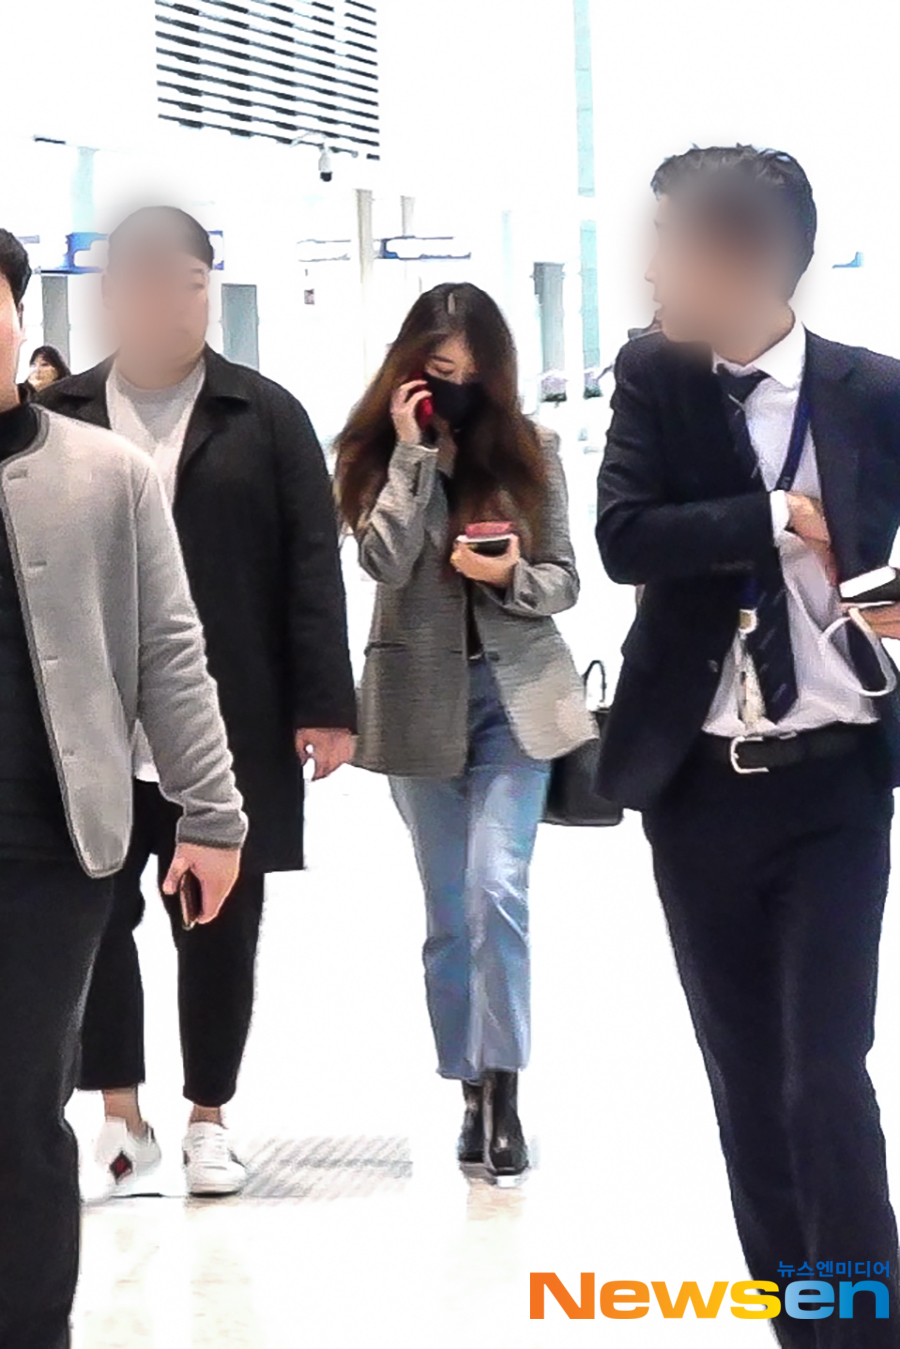 Actor and singer Ji-yeon his departure on March 15th at Incheon International Airport in Unseo-dong, Jung-gu, Incheon.#Ji-yeon #Incheon Airport #Airport Fashionkim ki-tae